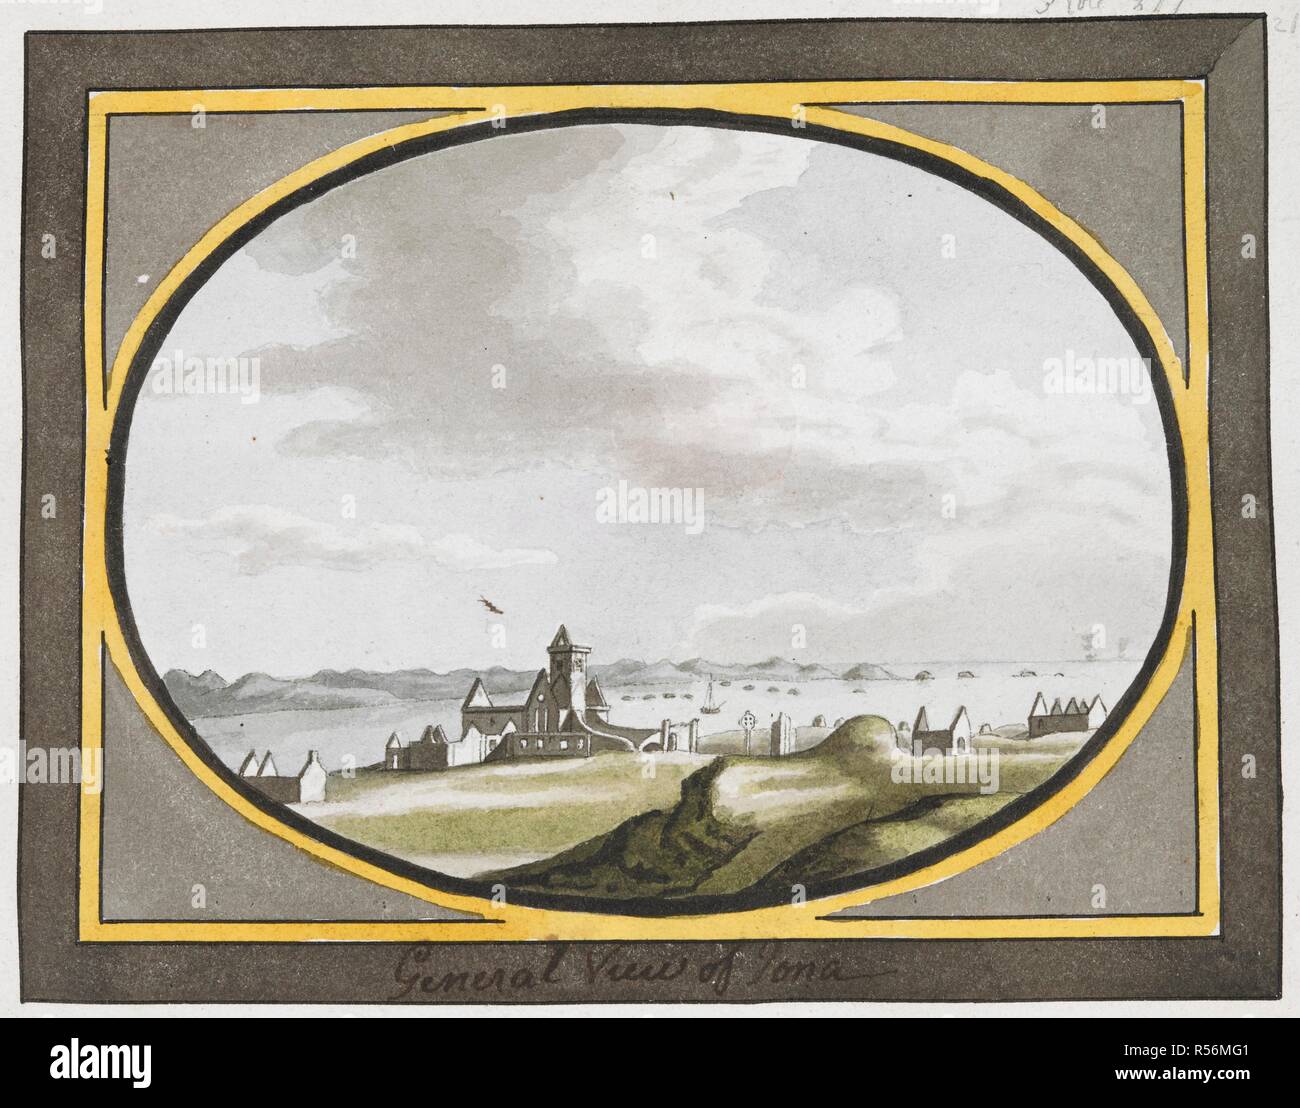 A view of the Island of Iona or Icolmkill. A colored general view of the Island of Iona or Icolmkill. ca. 1750-1800. Source: Maps K.Top.49.37.2.a. Language: English. Stock Photo